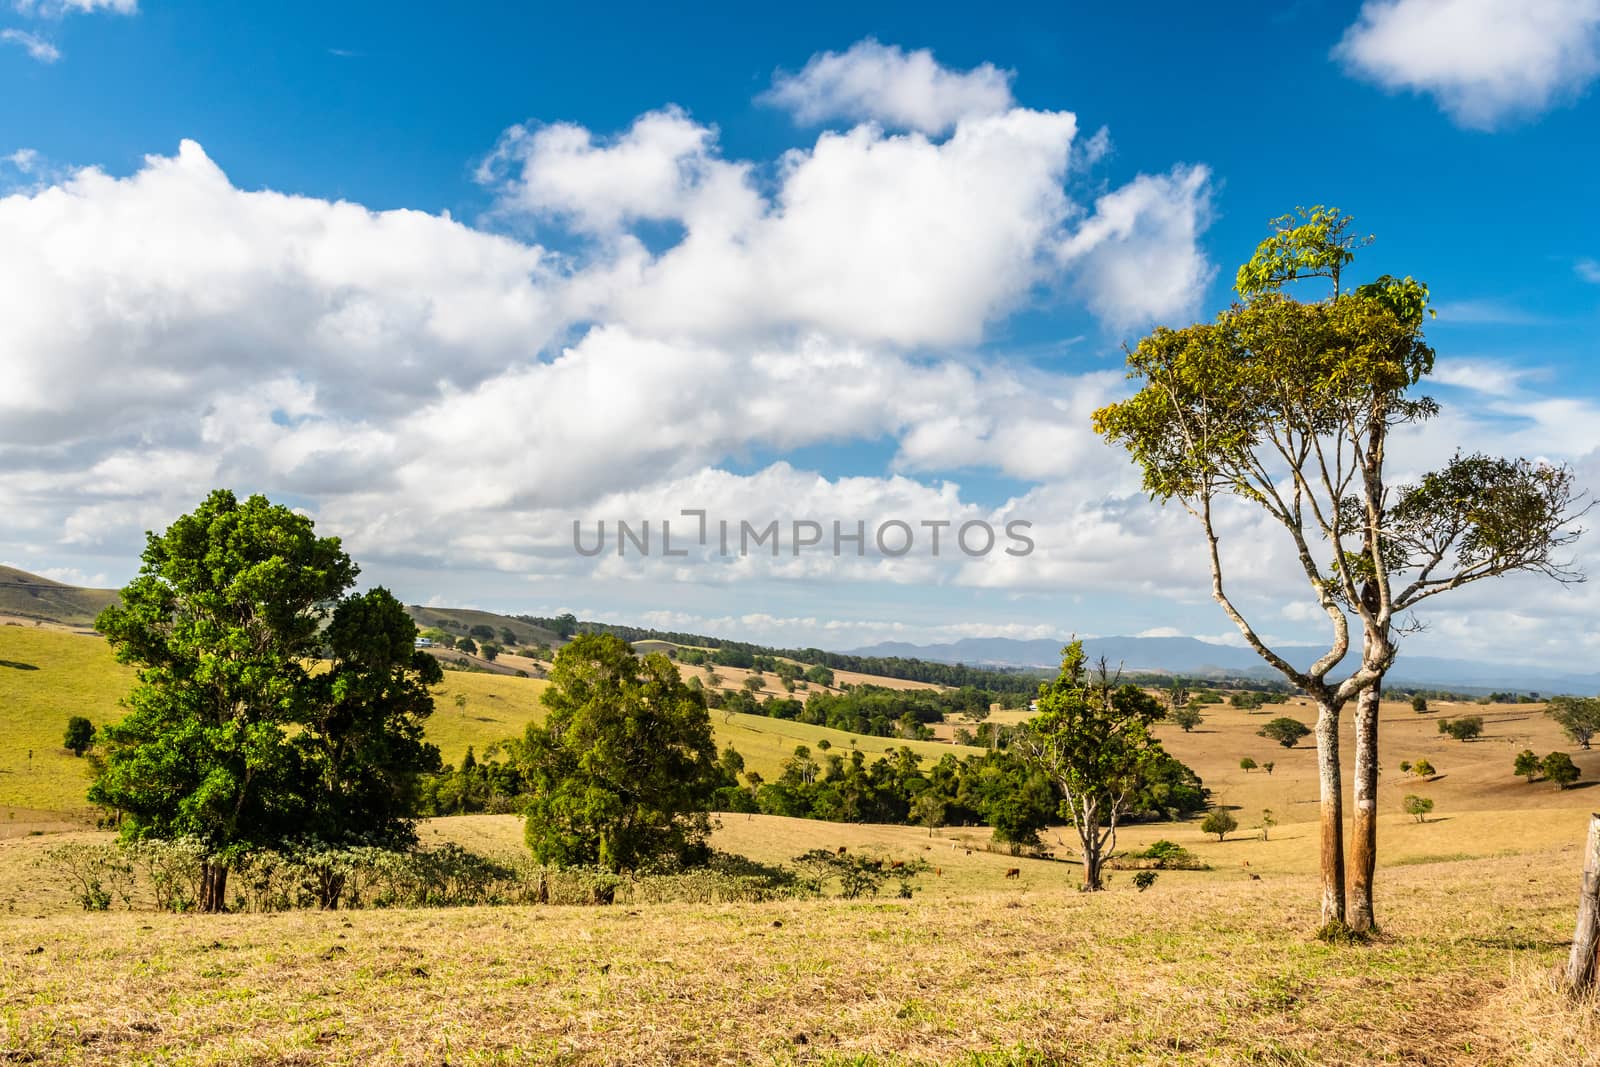 Queensland countryside landscape in the dry season by mauricallari